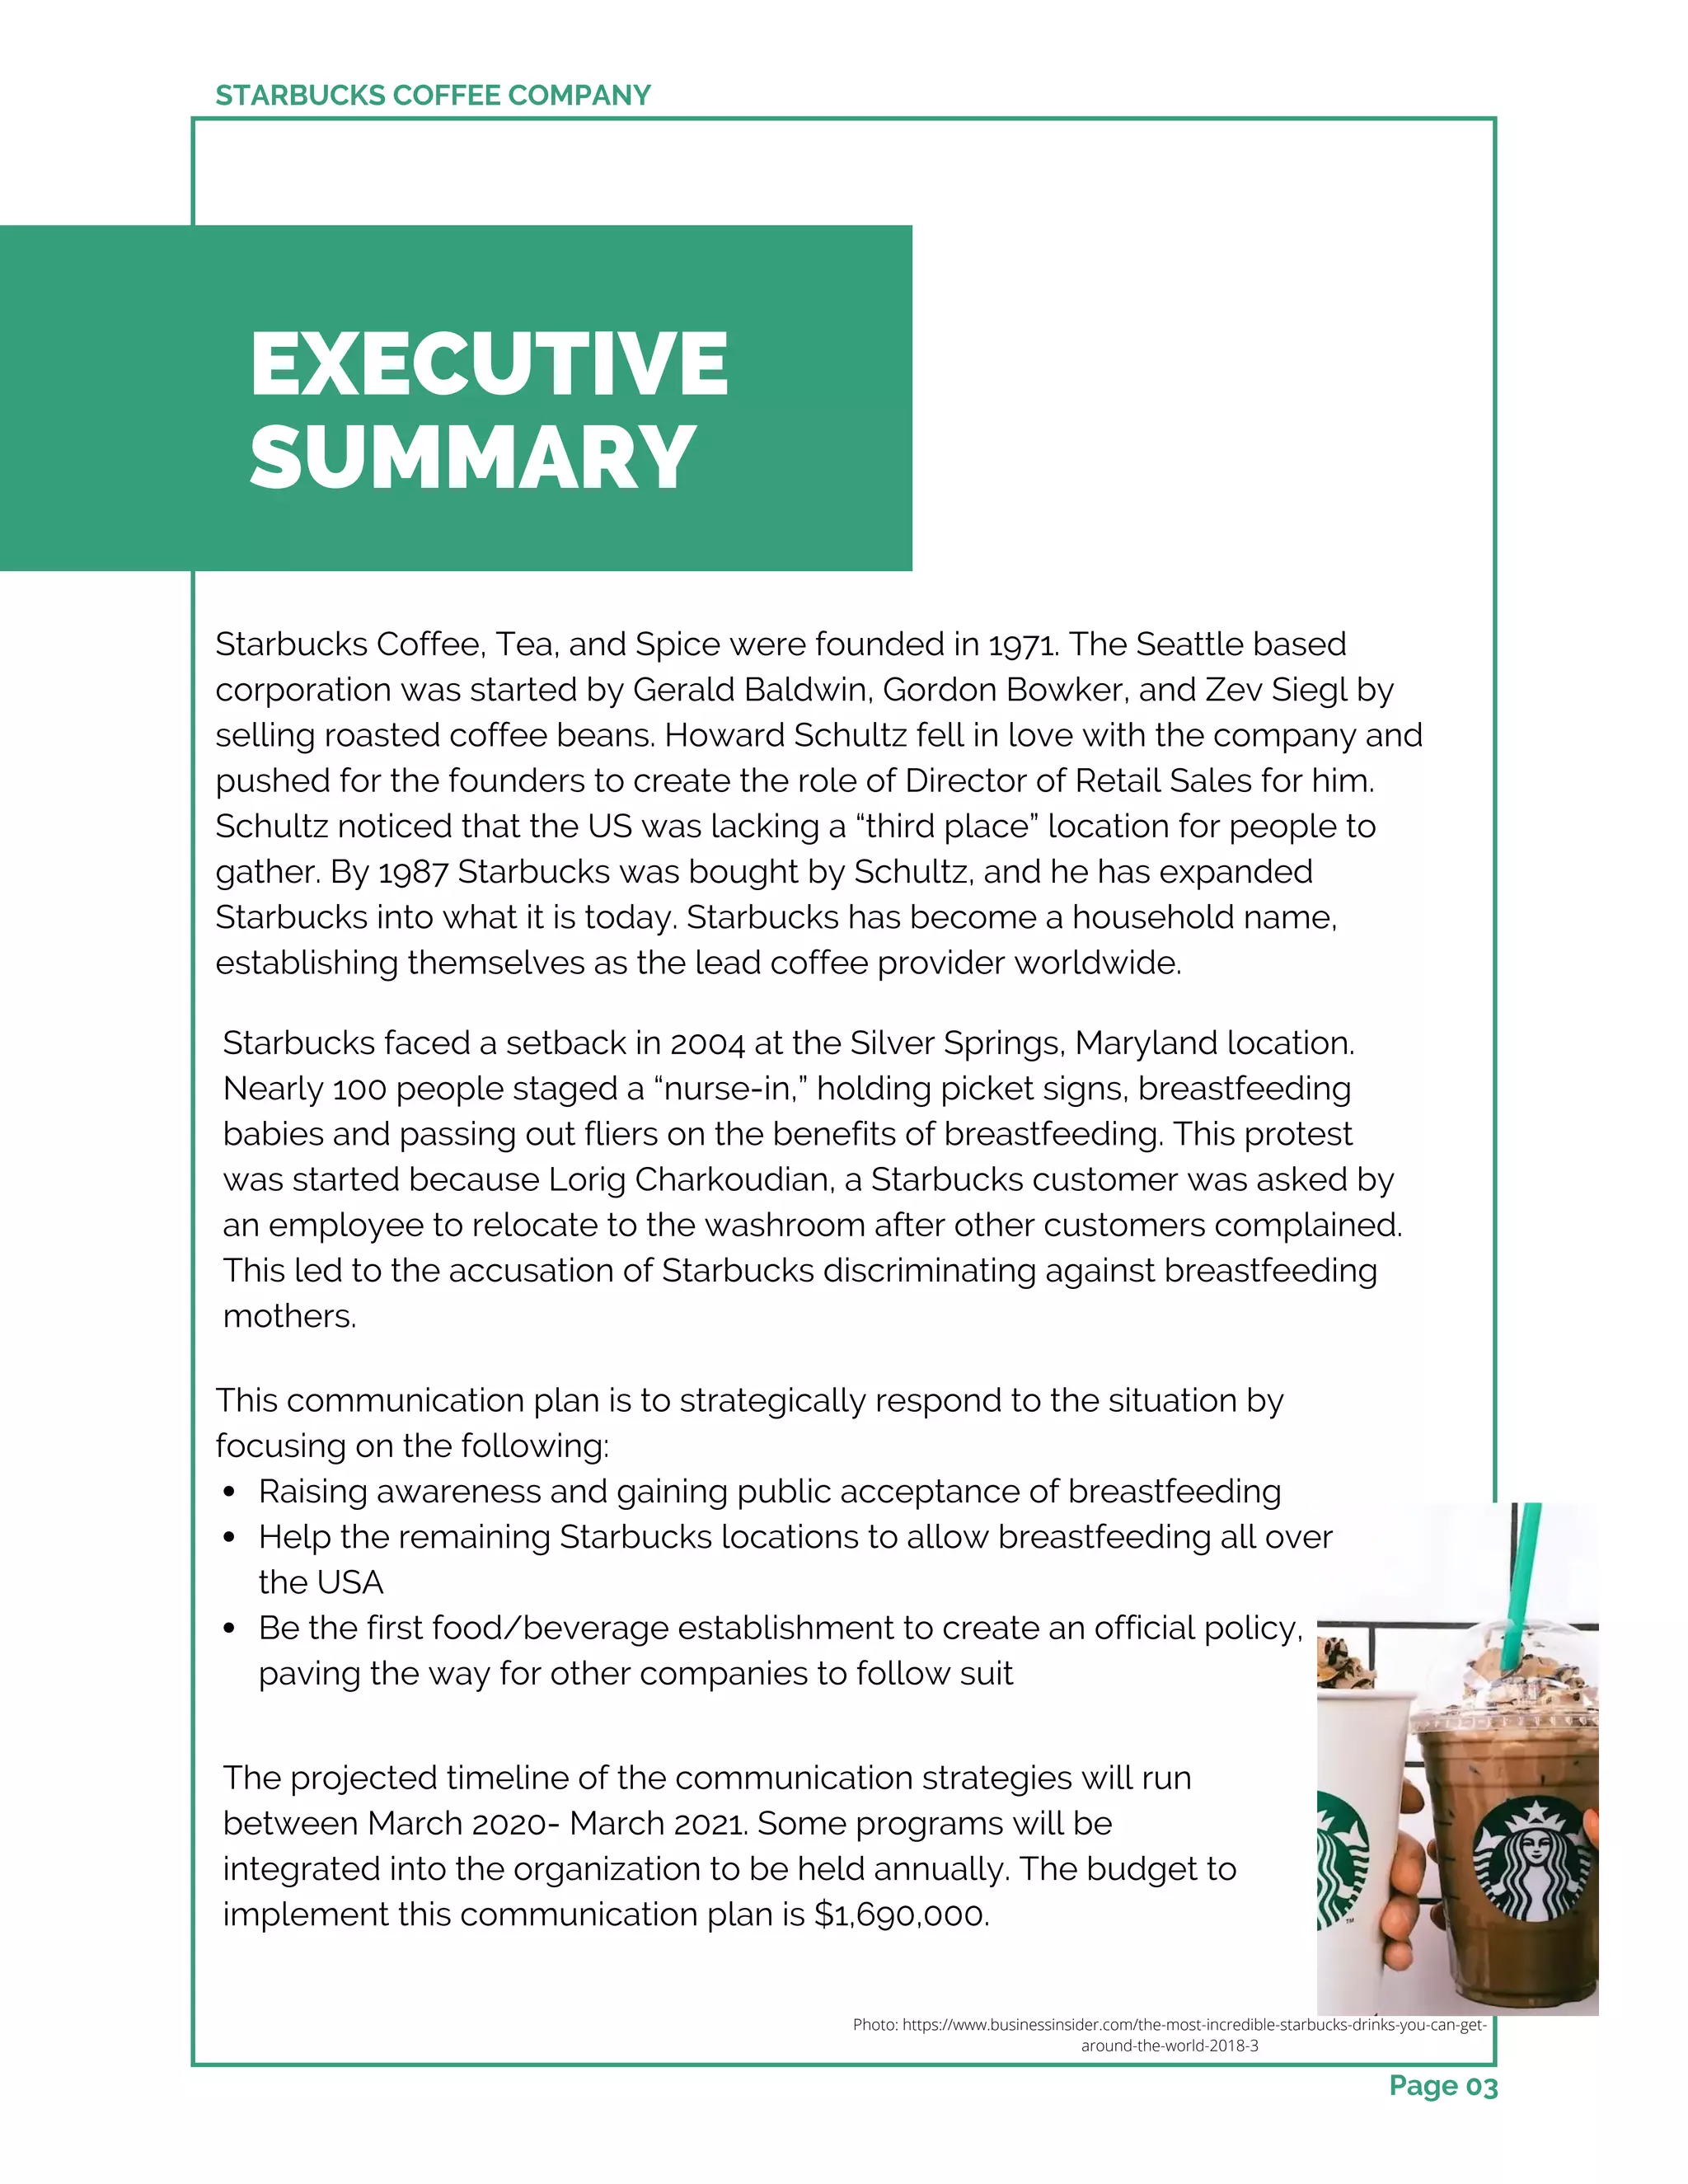 starbucks communication with employees